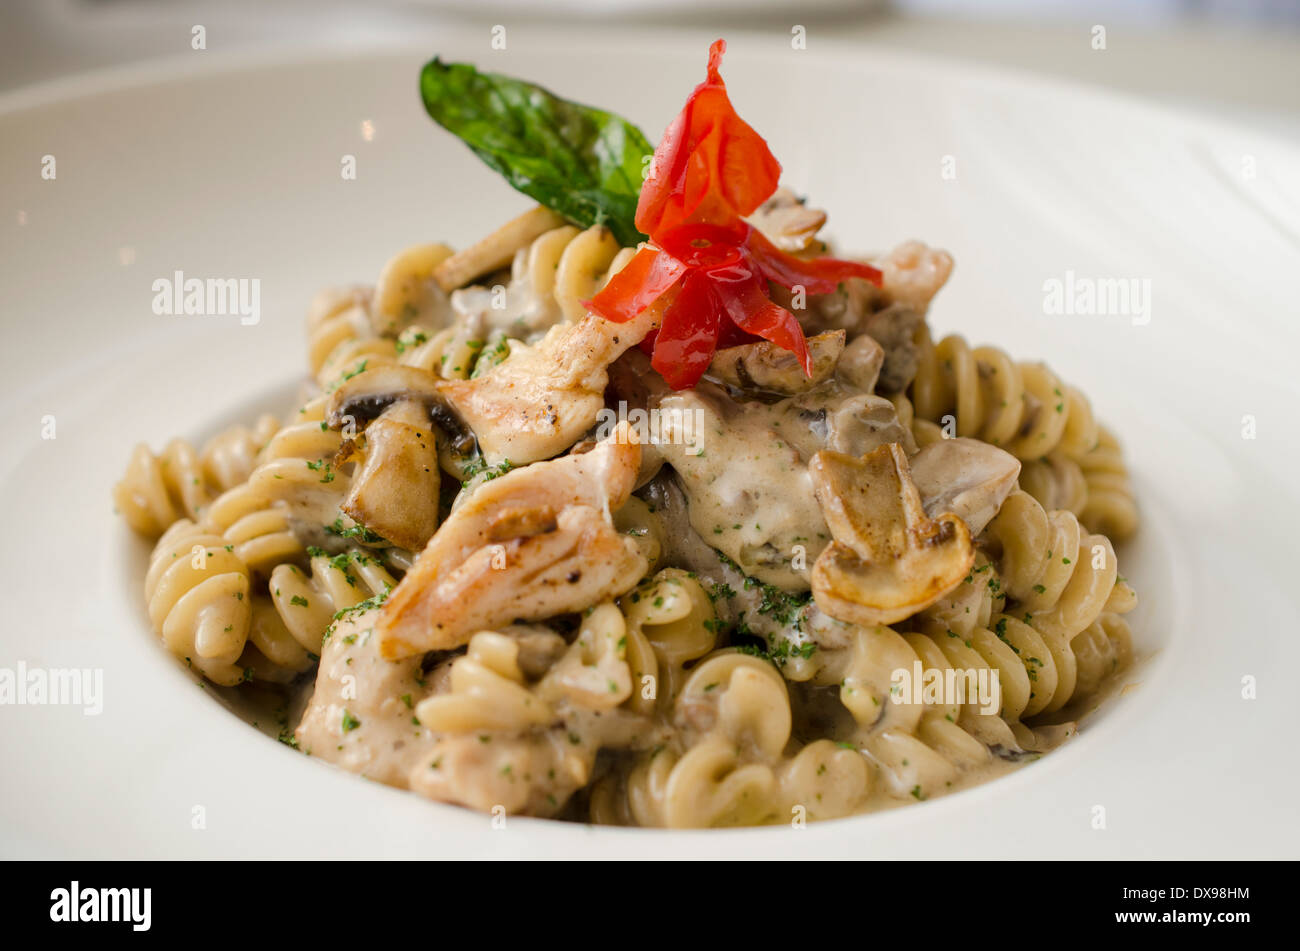 Fusilli (pasta) cooked al dente, in a creamy sauce with mushrooms and chicken, garnished with fried basil and a cherry tomato. Stock Photo